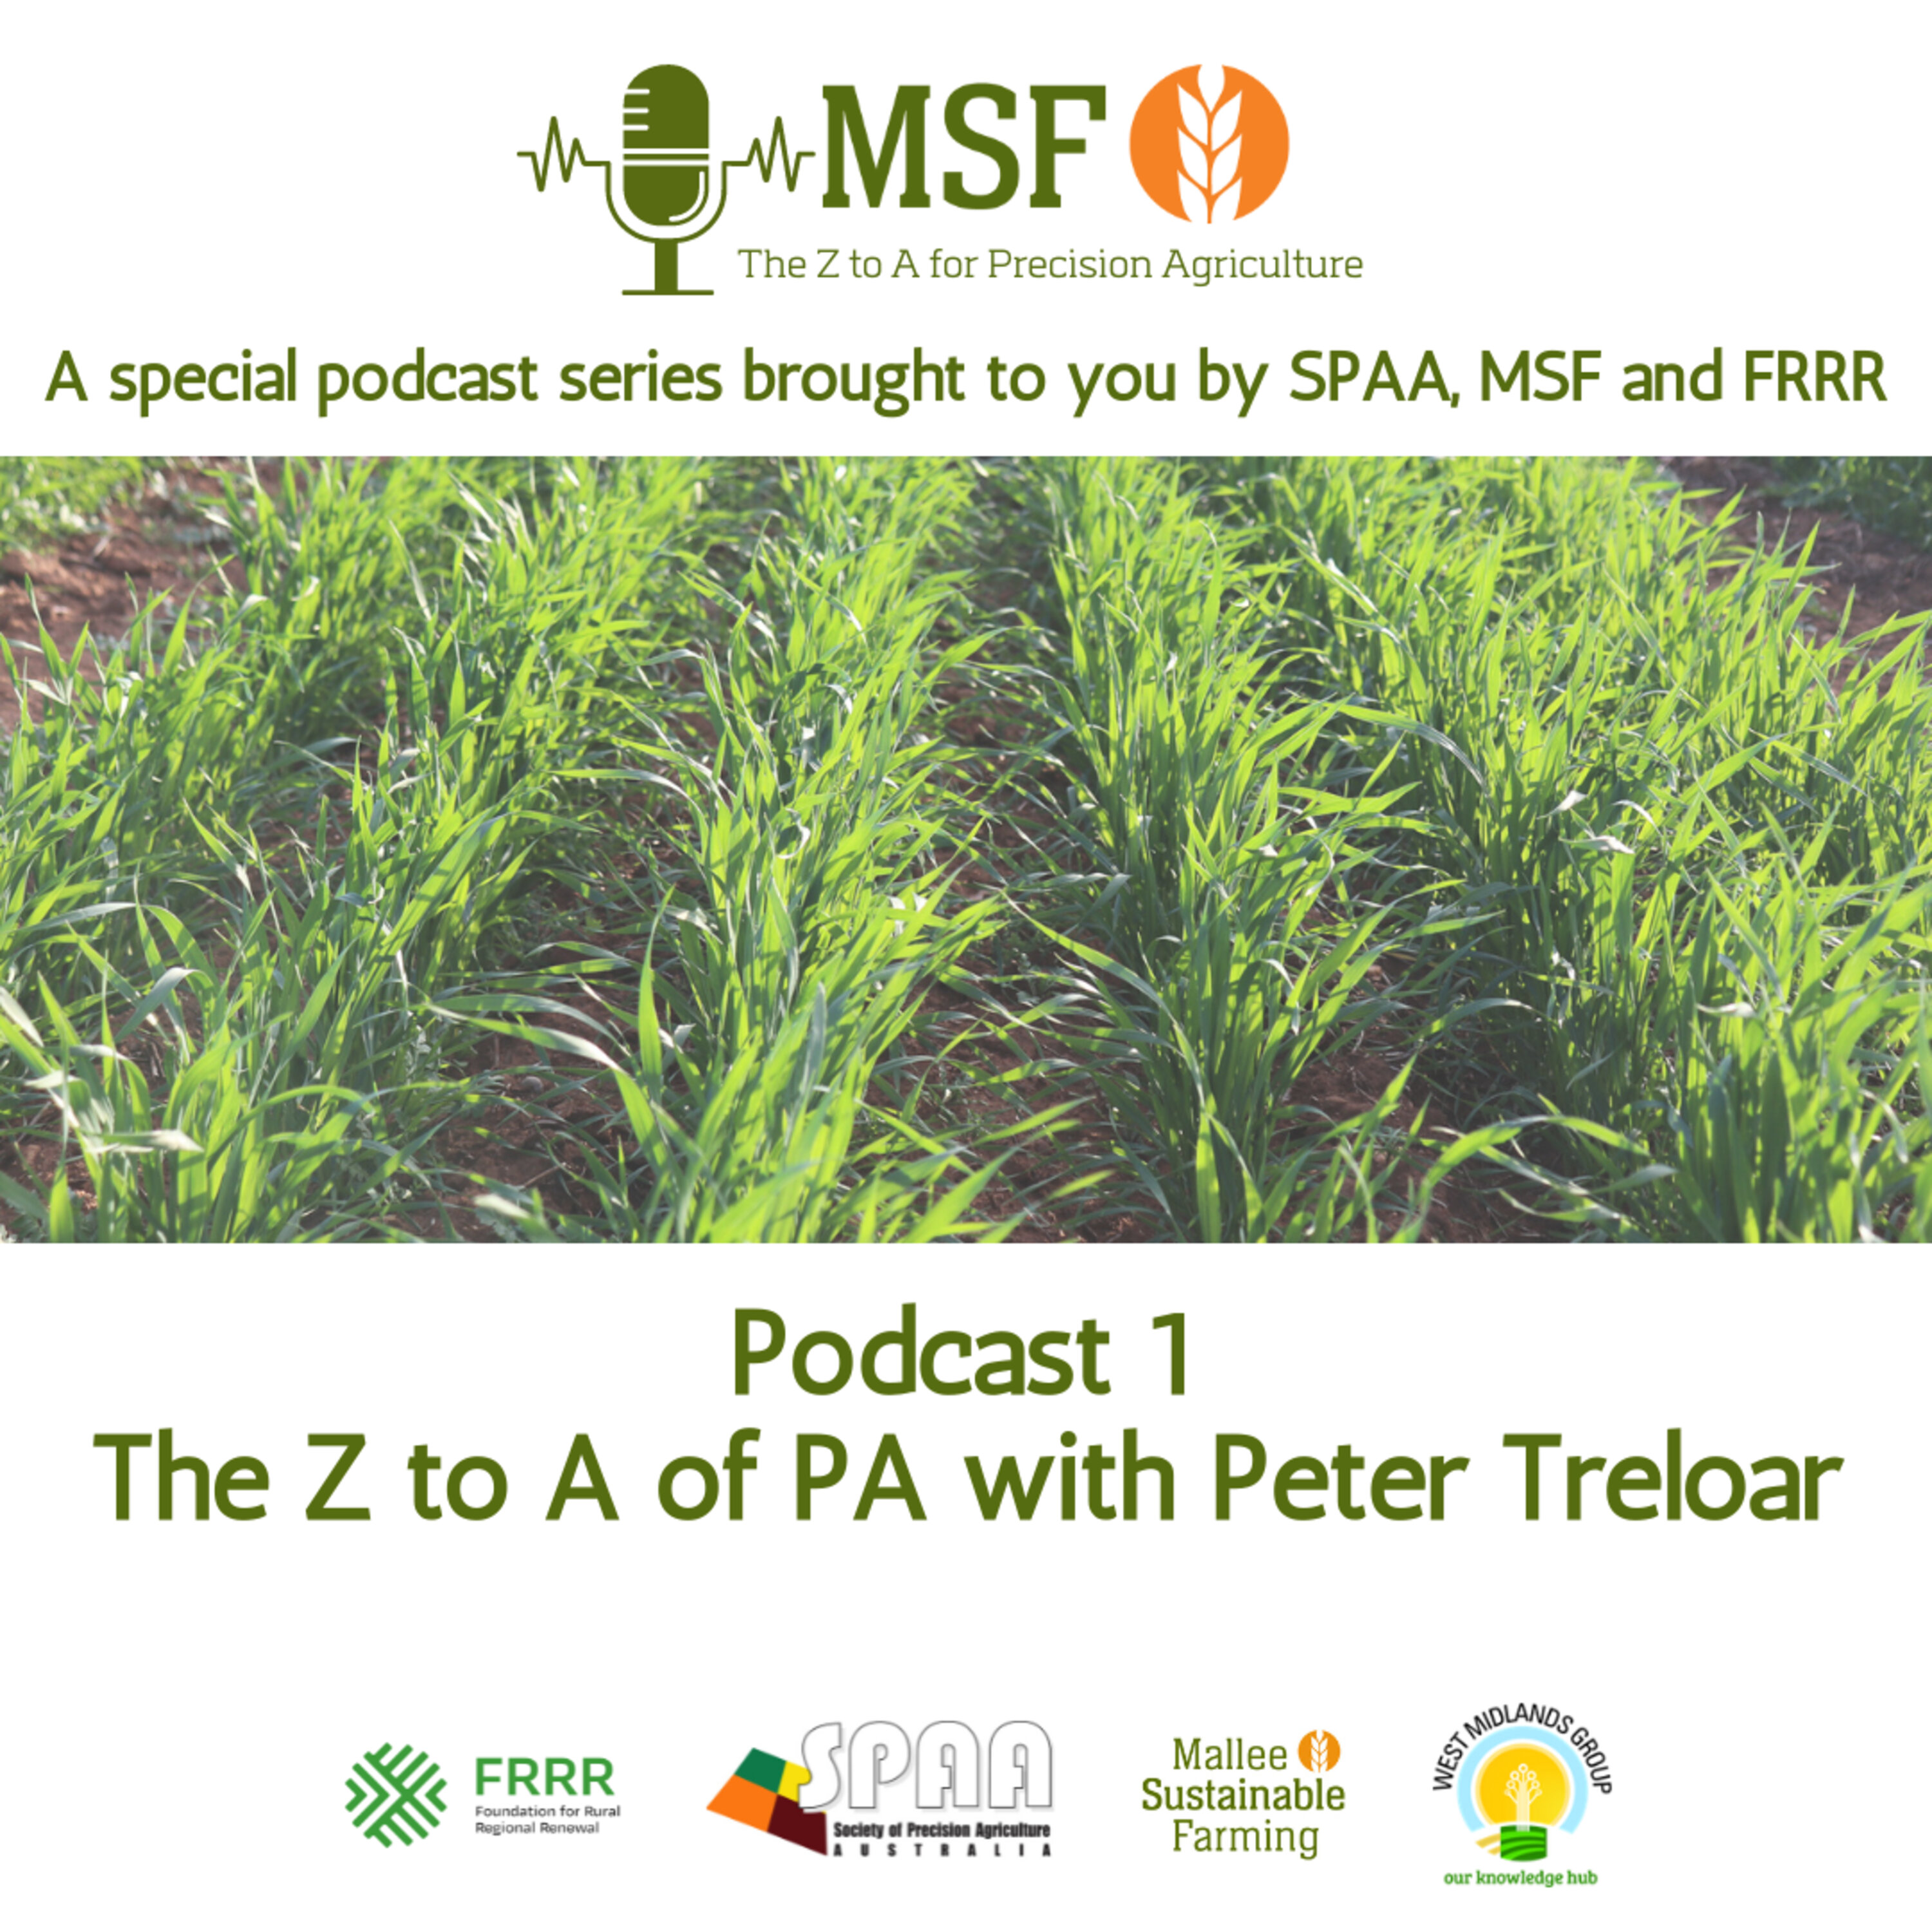 The Z to A of PA with Peter Treloar